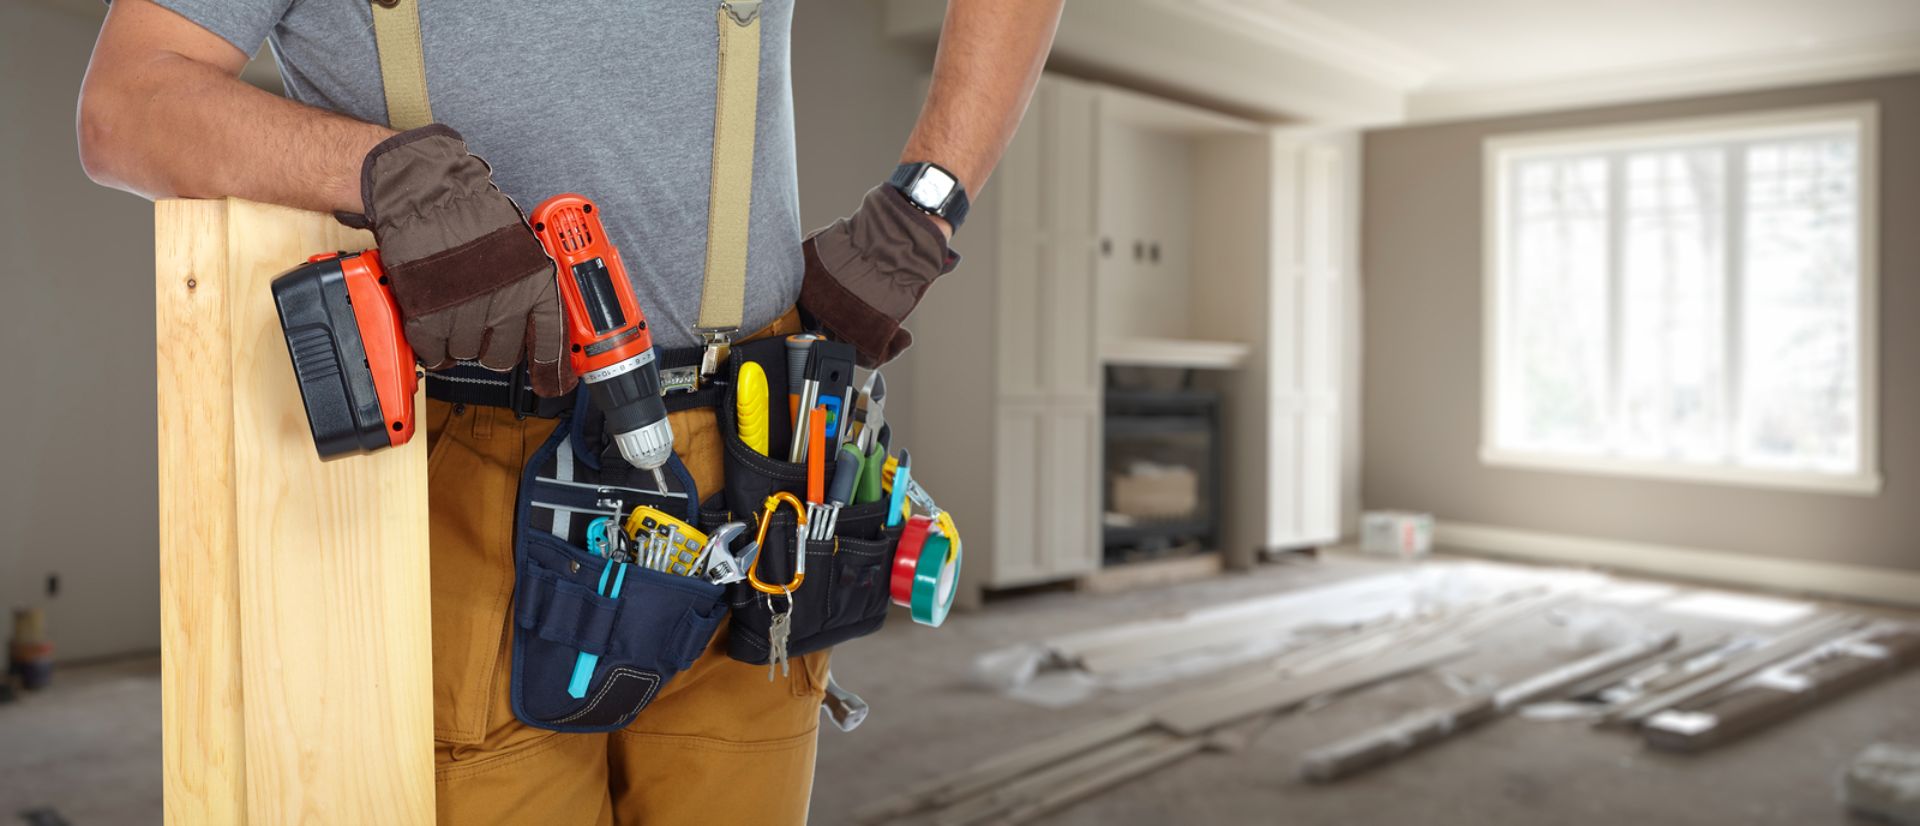 Commercial Handyman near me ★ Find top local contractors & taskers in